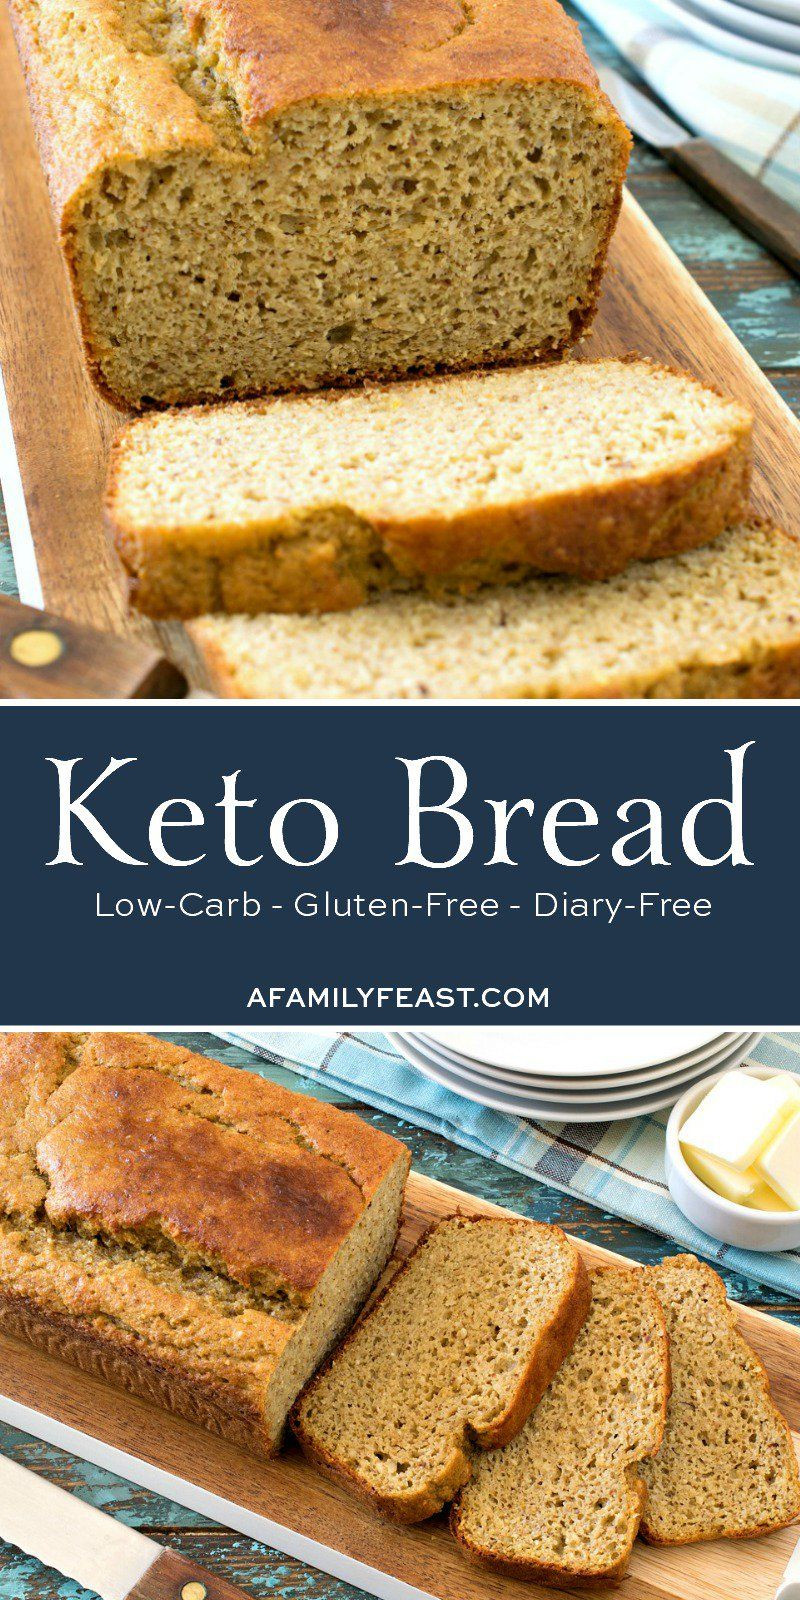 Diy Keto Bread Crumbs
 Homemade Keto Bread Soft moist and delicious low carb